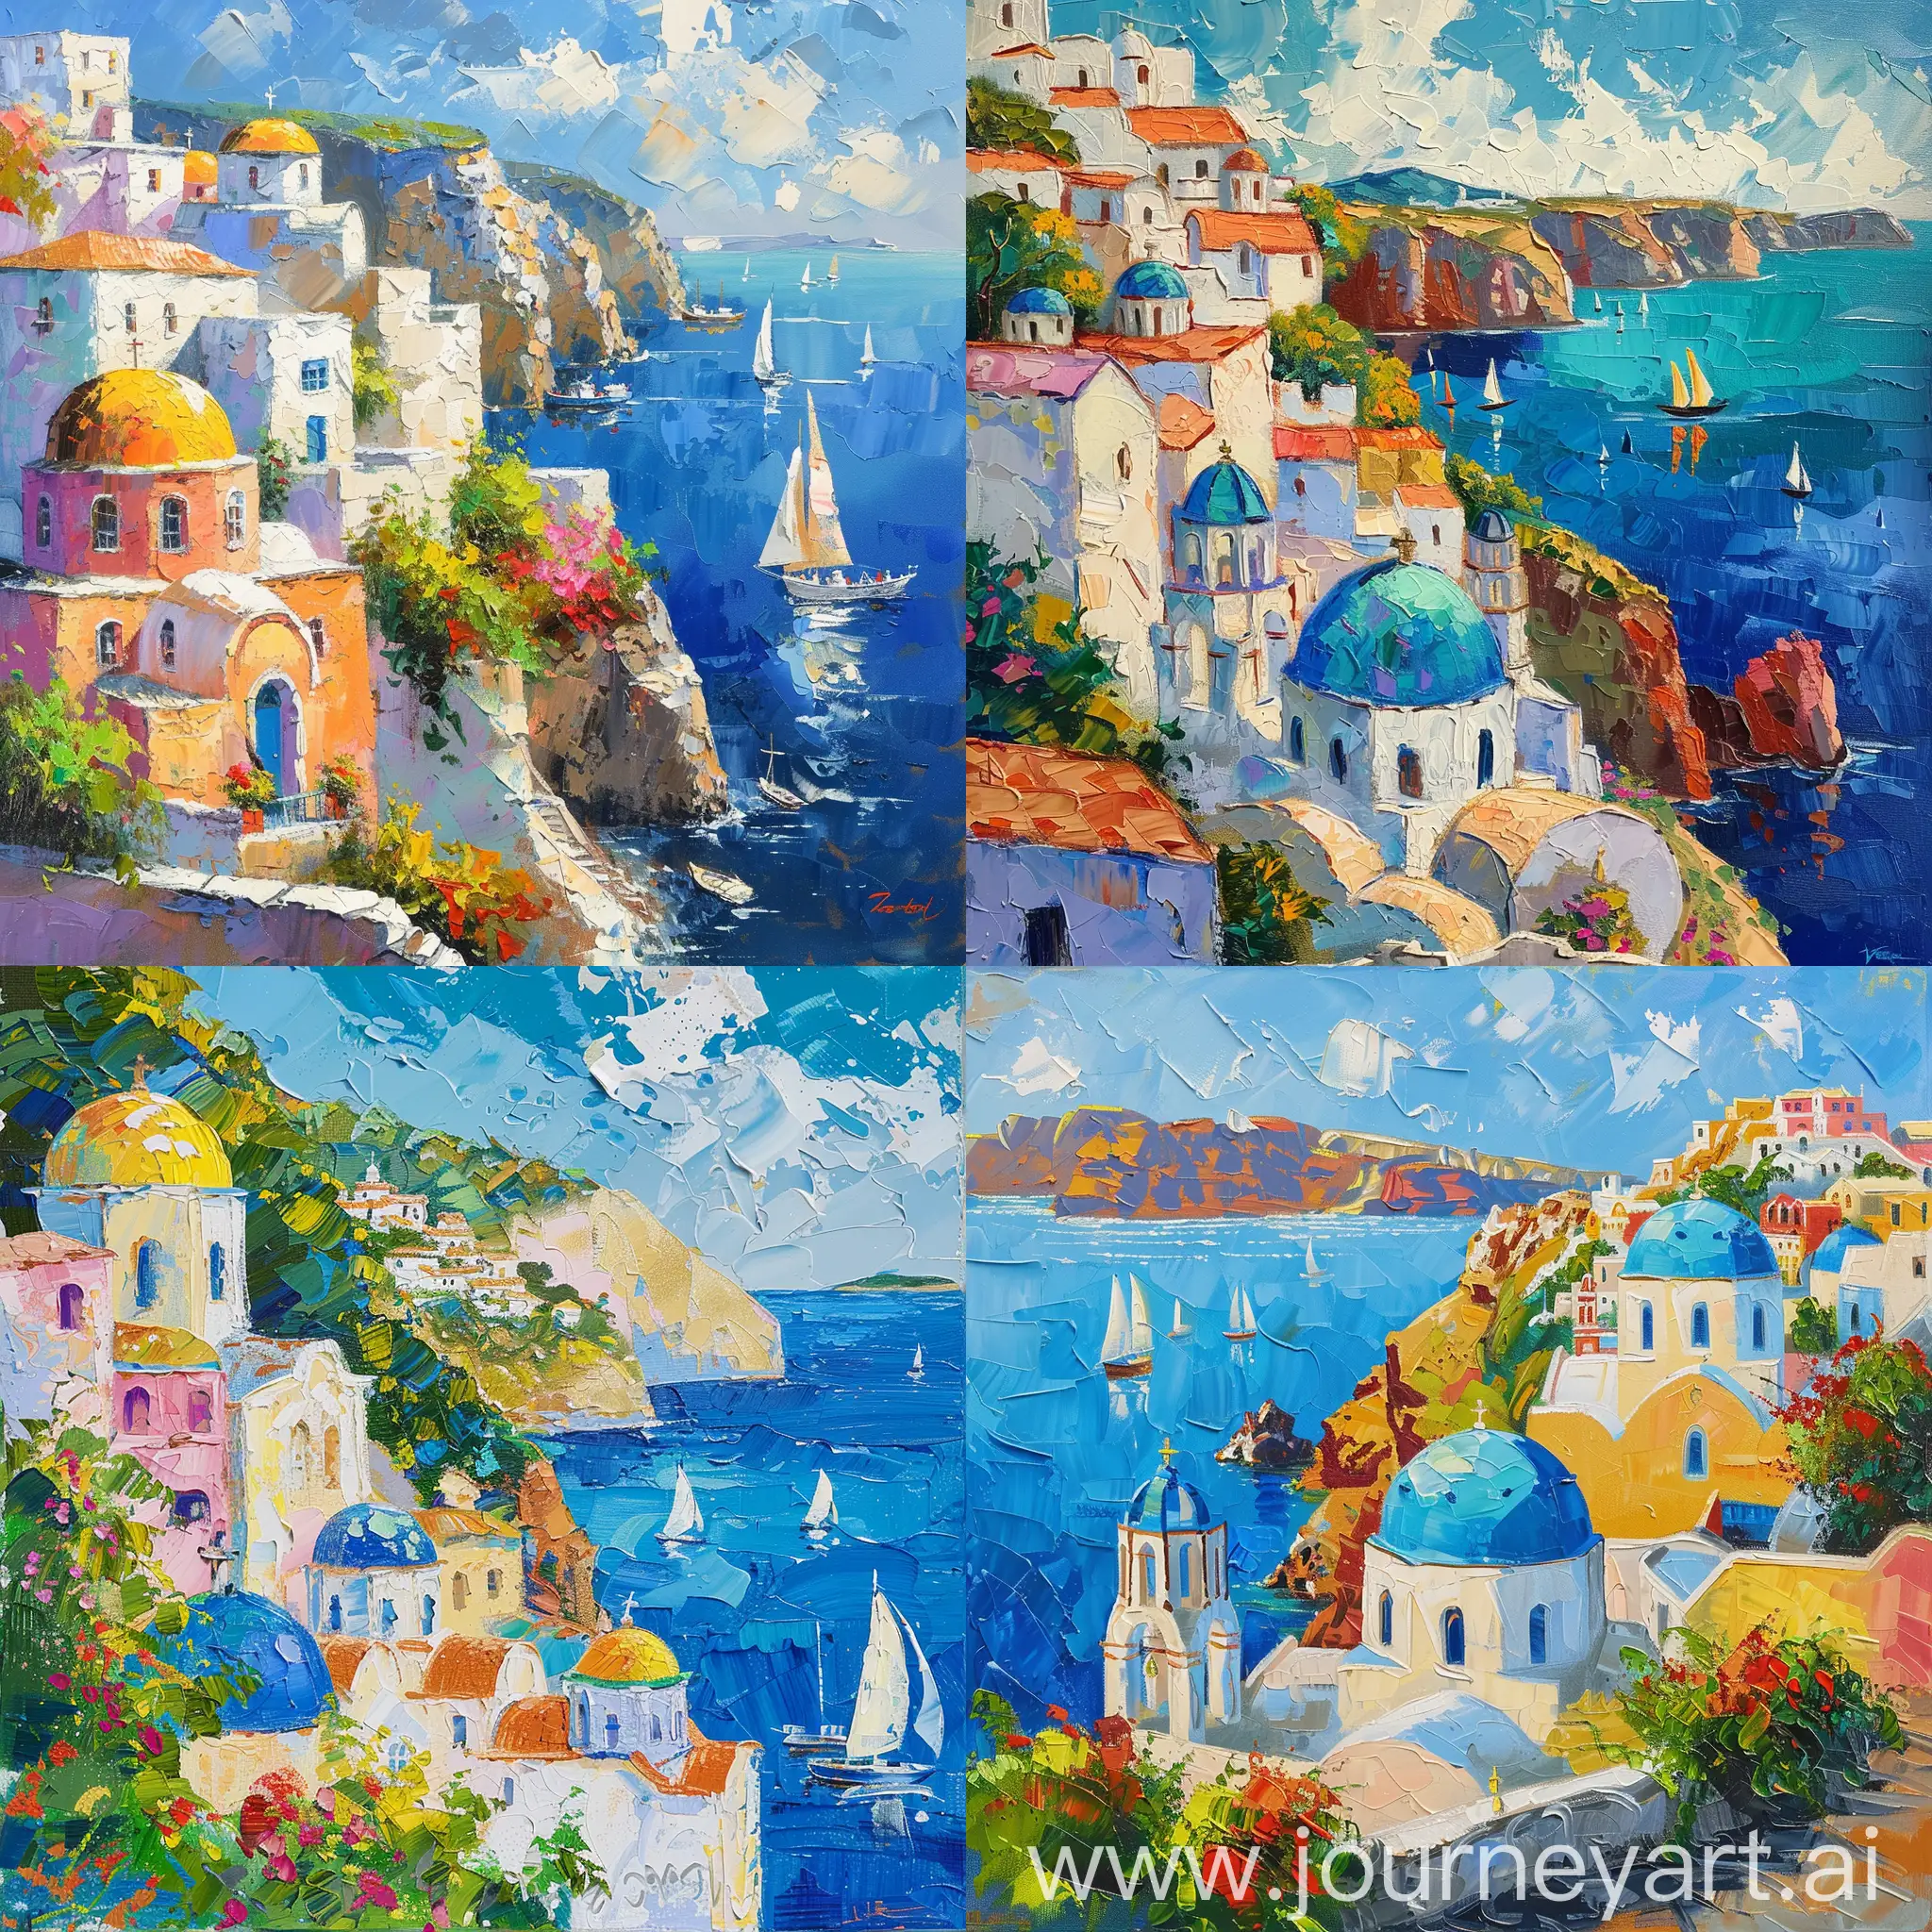 greek coast, oil painting, impressionist style, sunny day, colorful buildings and domes overlooking the sea with sailboats in background, lush greenery on cliffs, vibrant colors, detailed brushstrokes, textured canvas effect, impressionistic technique, high resolution --stylize 750